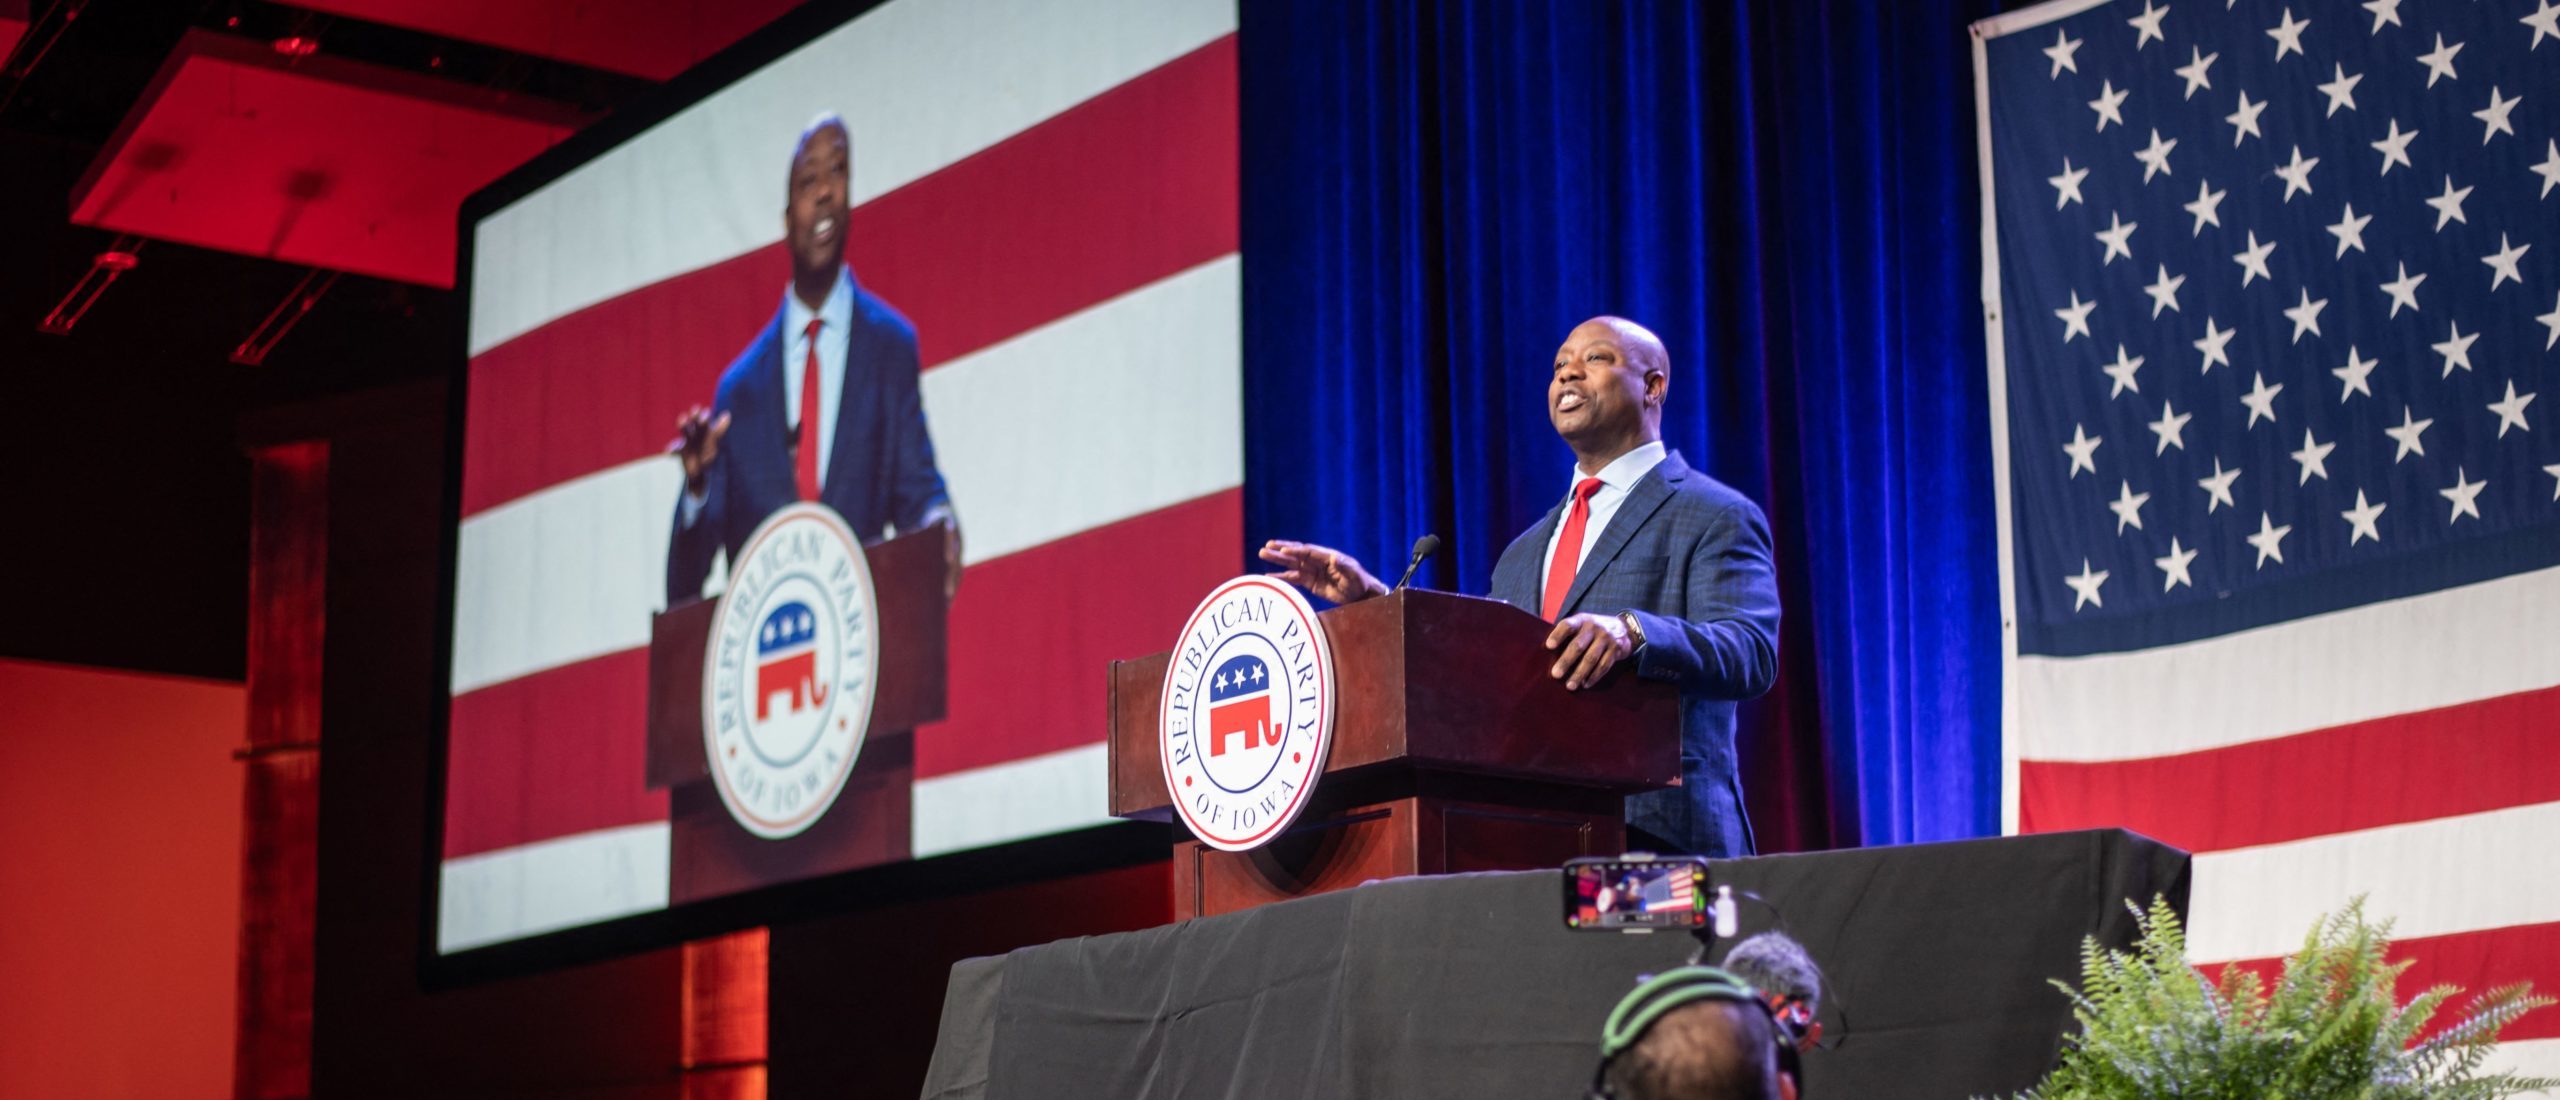 US Senator and 2024 Republican Presidential hopeful Tim Scott speaks at the Republican Party of Iowa's 2023 Lincoln Dinner at the Iowa Events Center in Des Moines, Iowa, on July 28, 2023. (Photo by SERGIO FLORES/AFP via Getty Images)